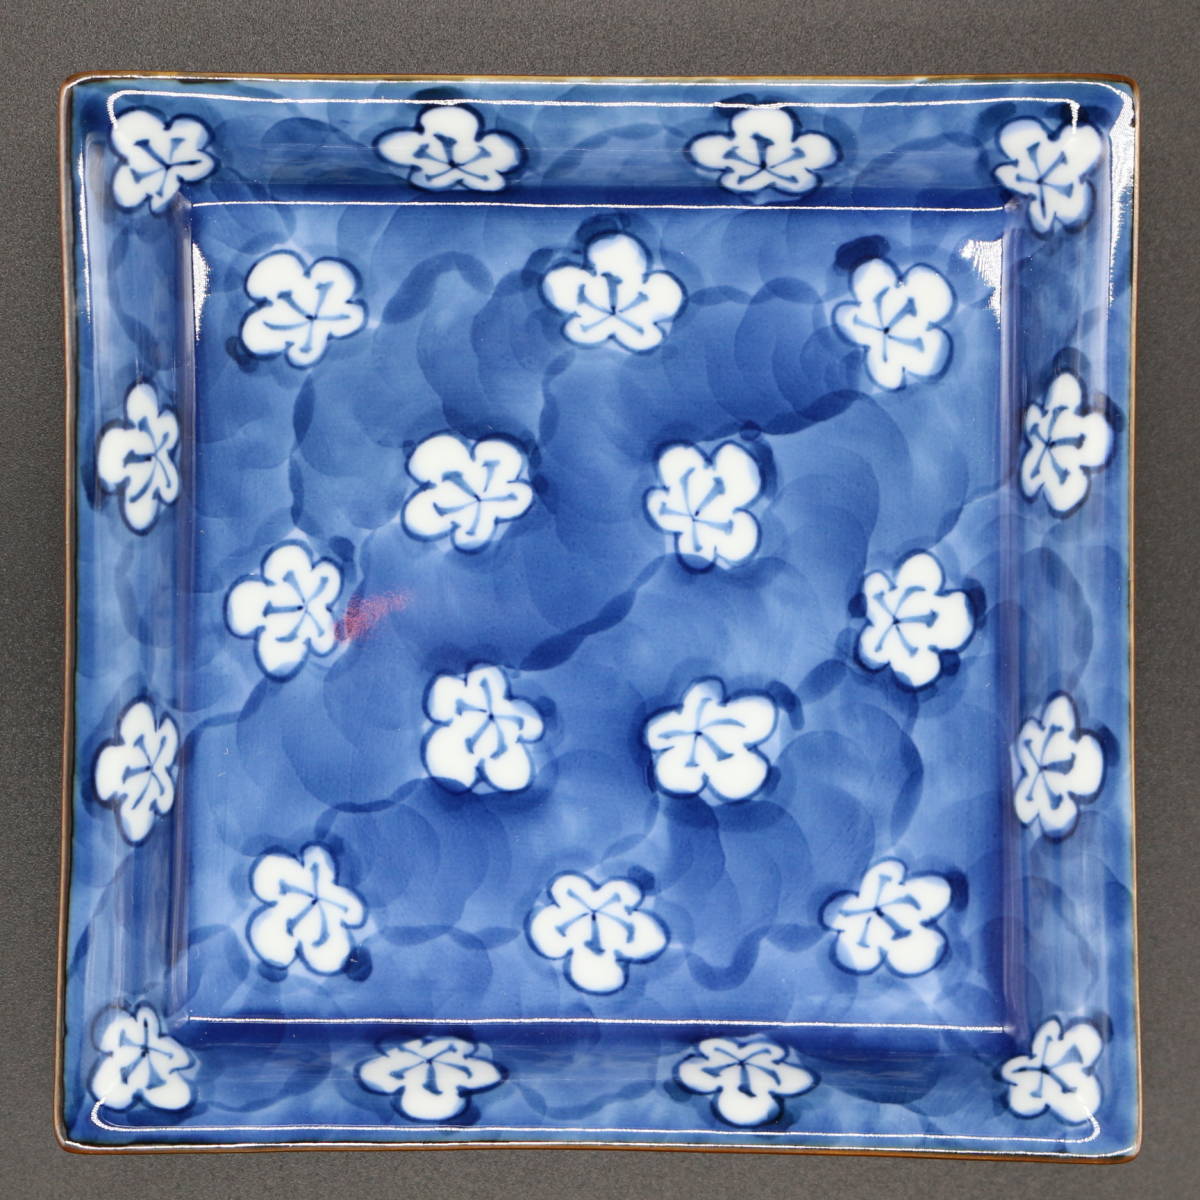  source right ../.. plate / 5 sheets set / old . manner plum ./ blue and white ceramics / angle plate / Arita ./ ceramics and porcelain / small plate / Japanese-style tableware / also box 